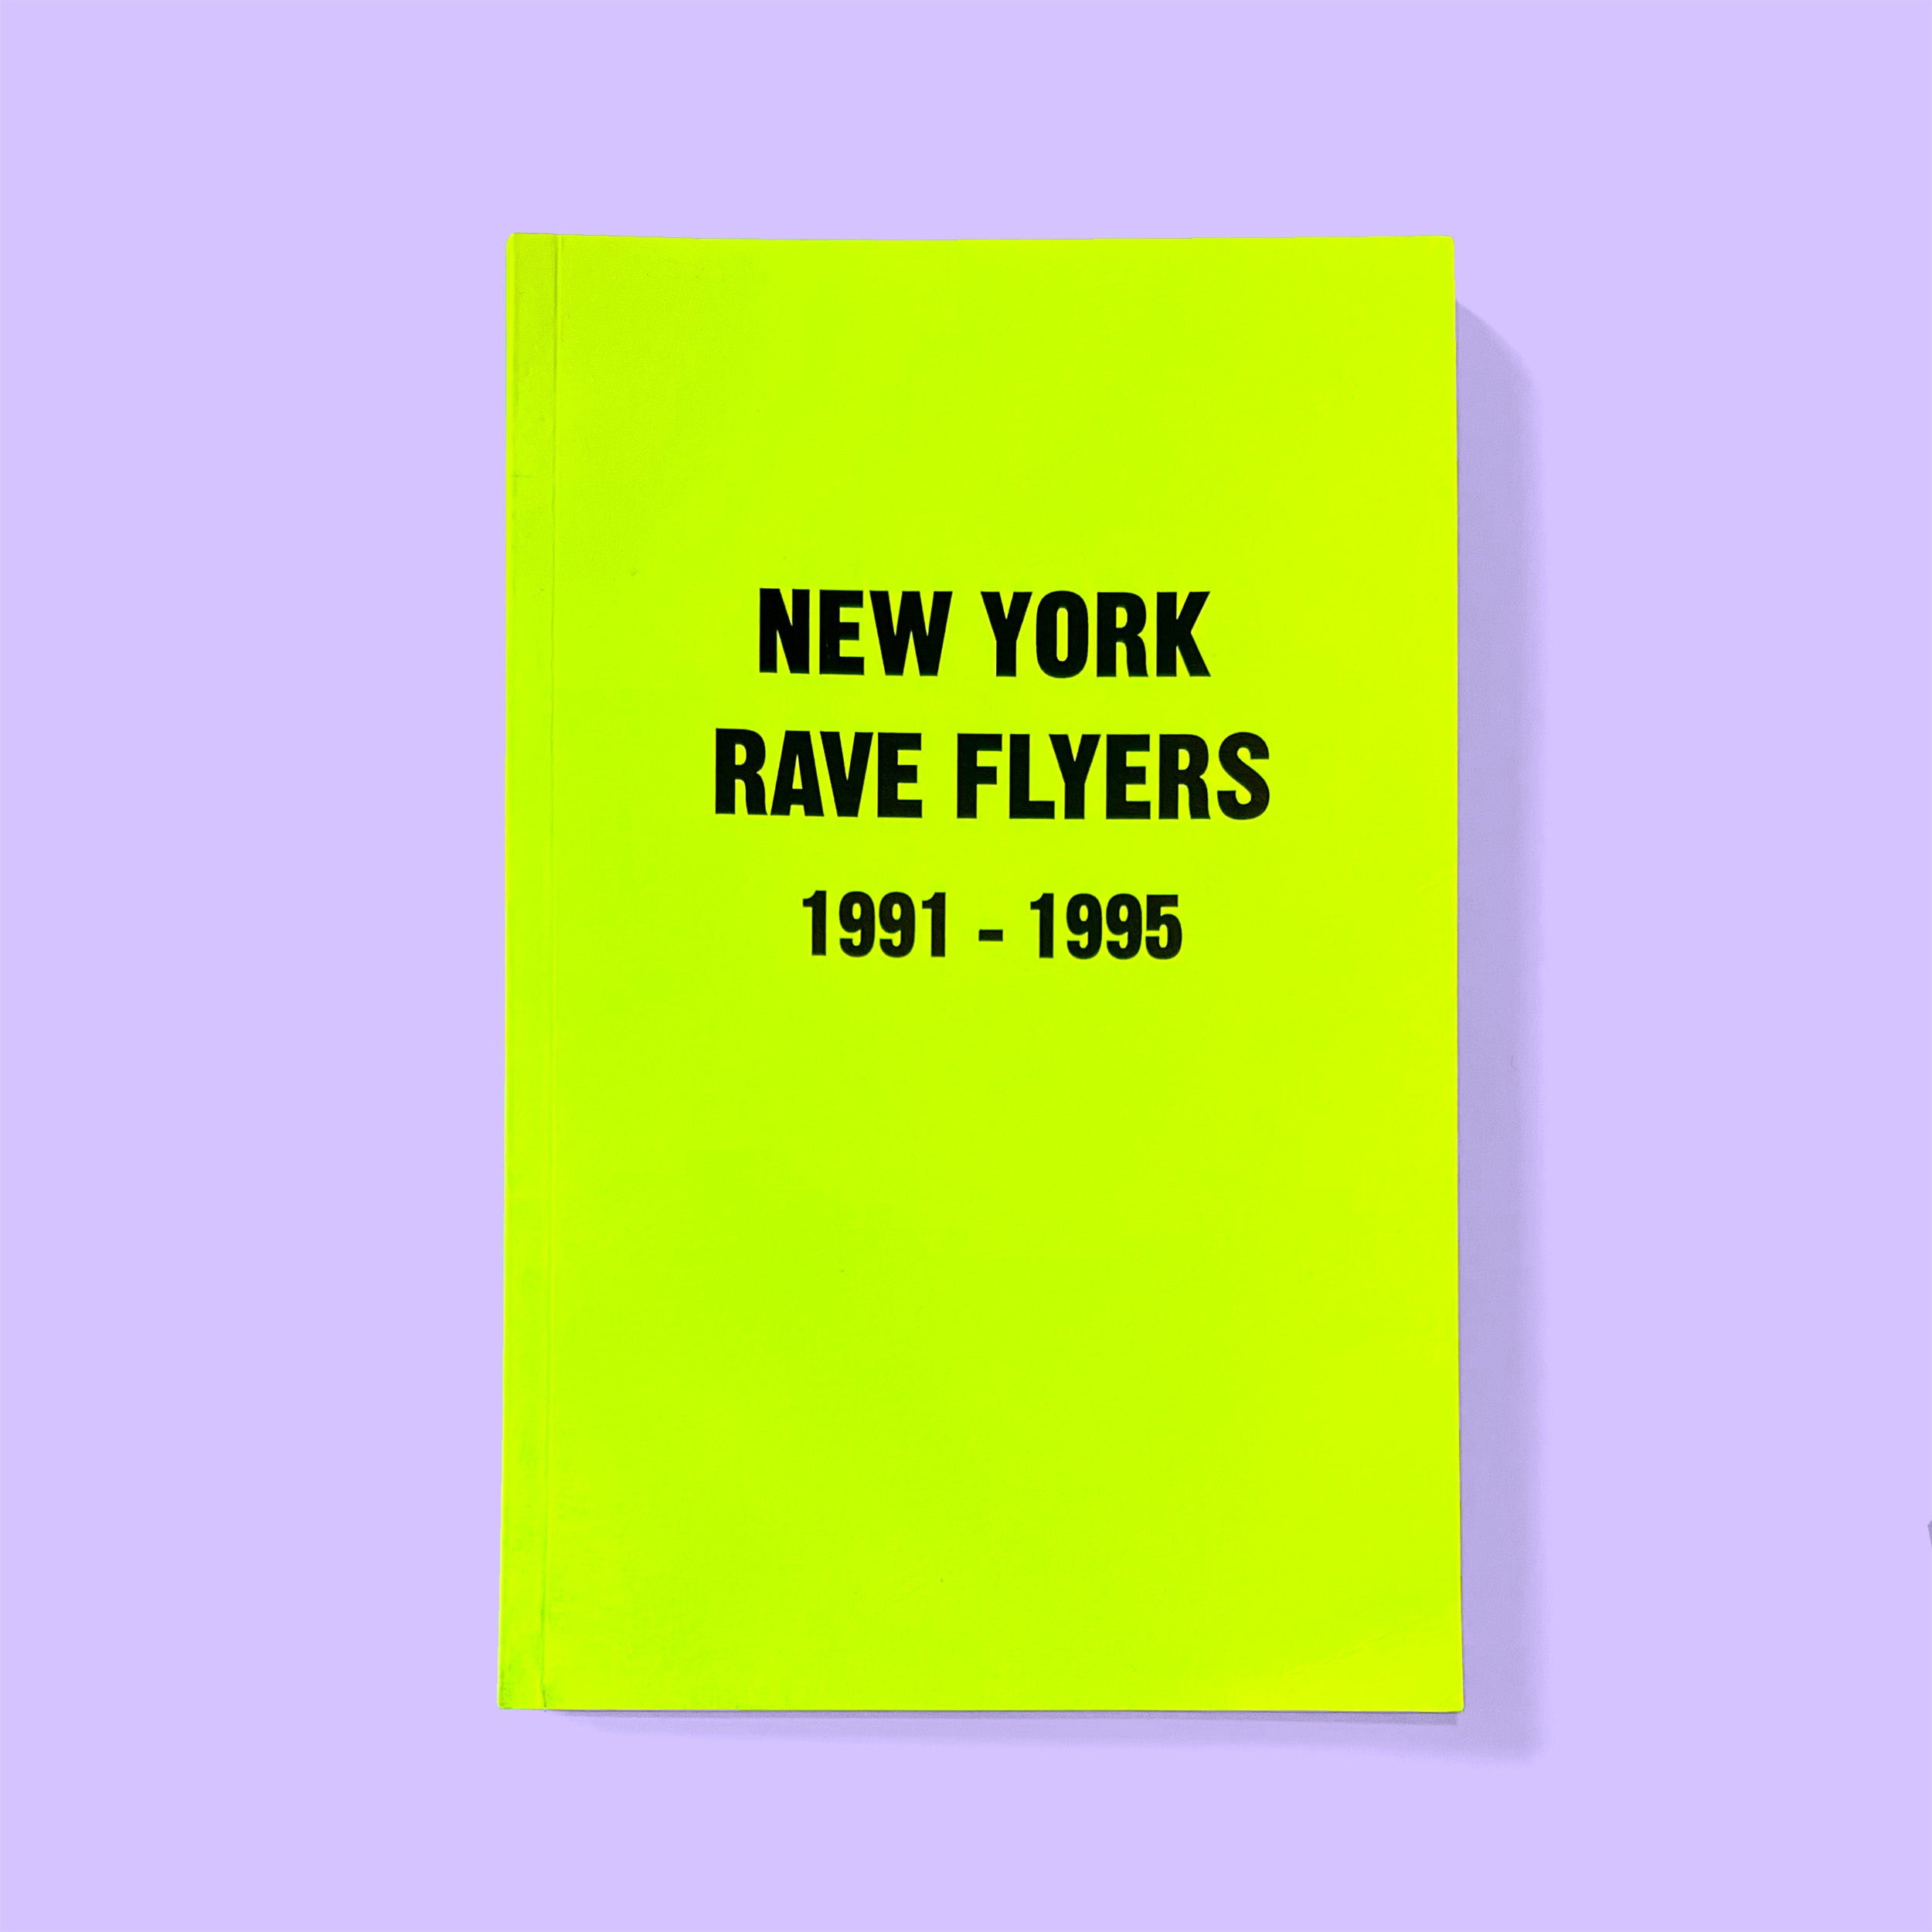 NEW YORK RAVE FLYERS 1991 - 1995 by Colpa Press